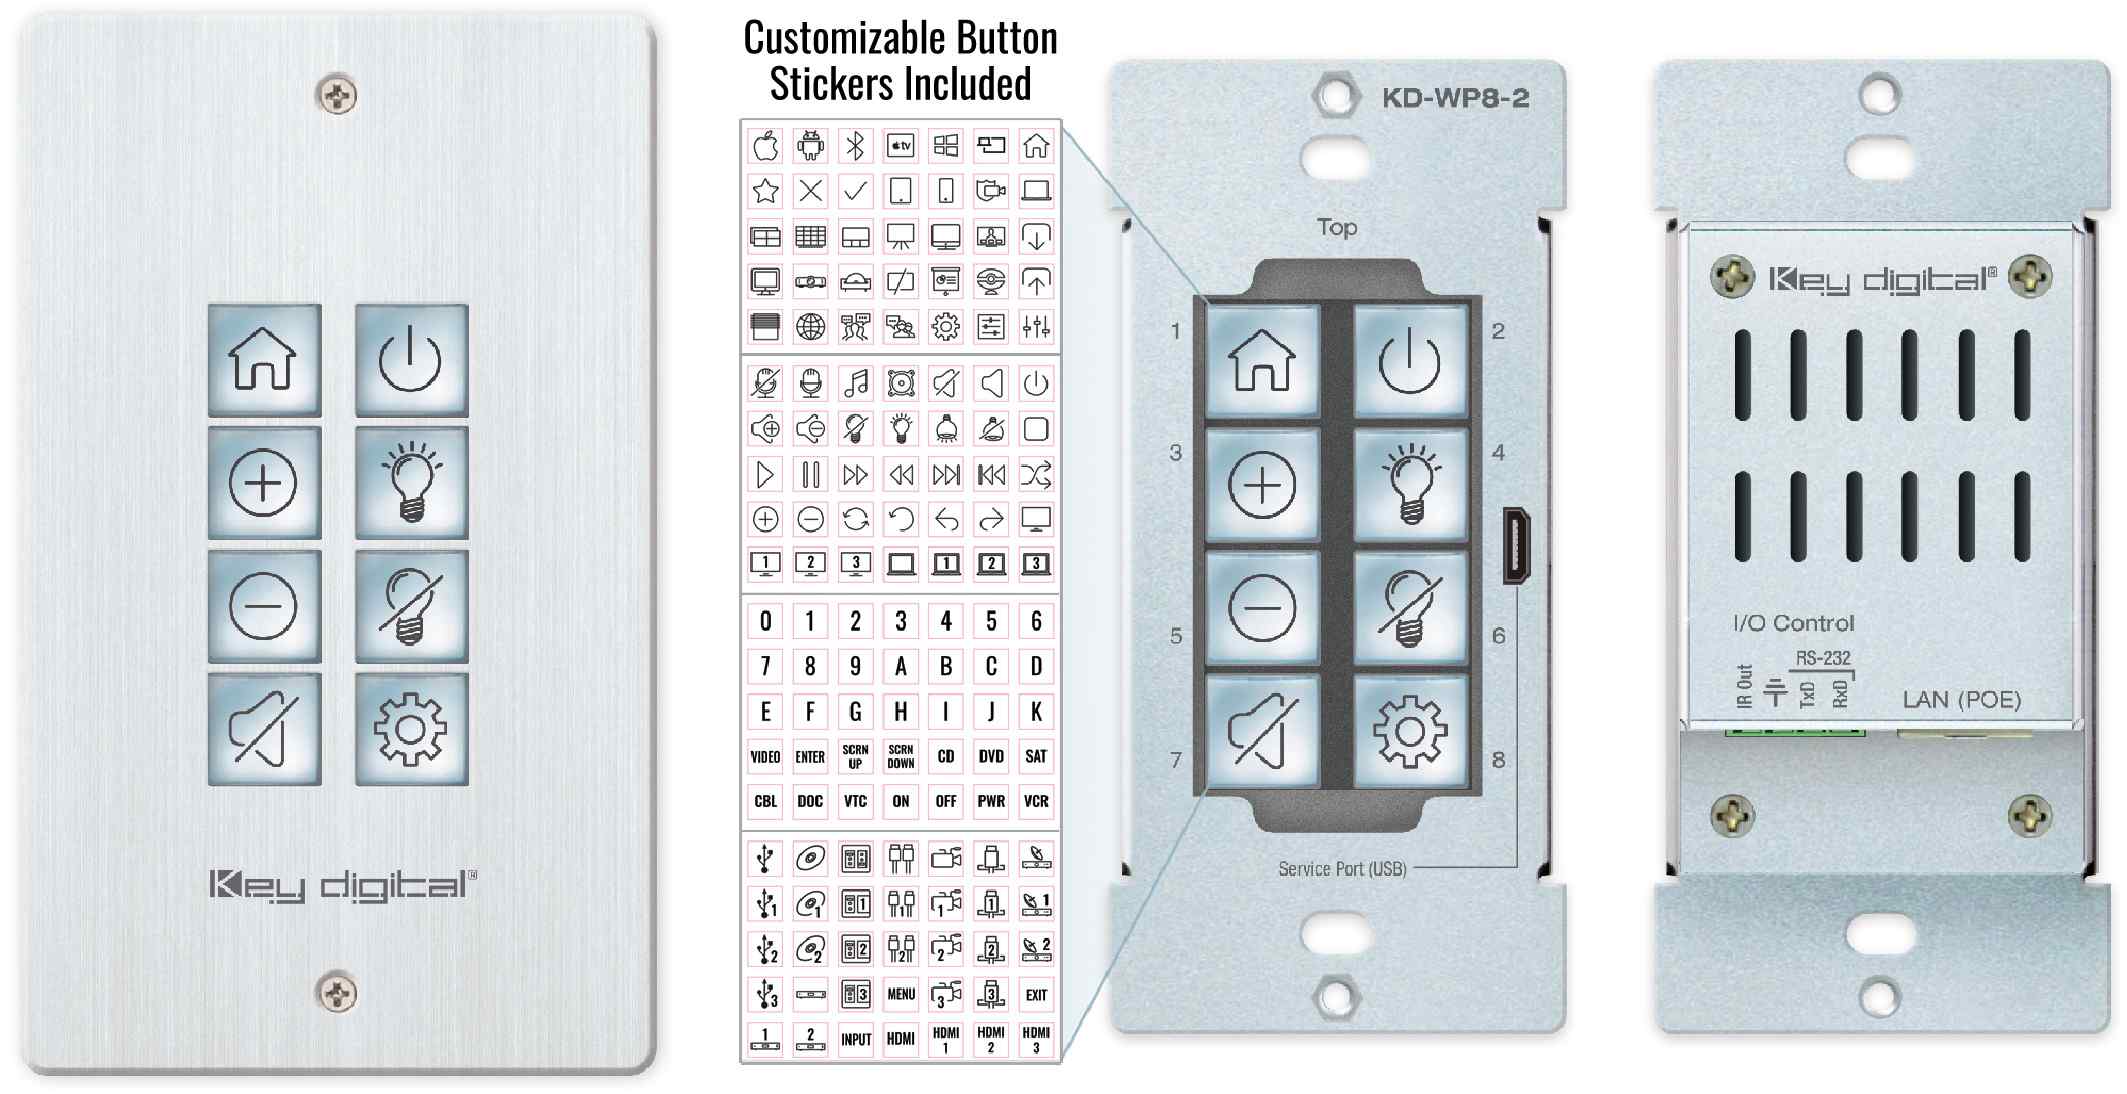 A versatile control keypad with programmable buttons for IP, RS-232, and IR device control